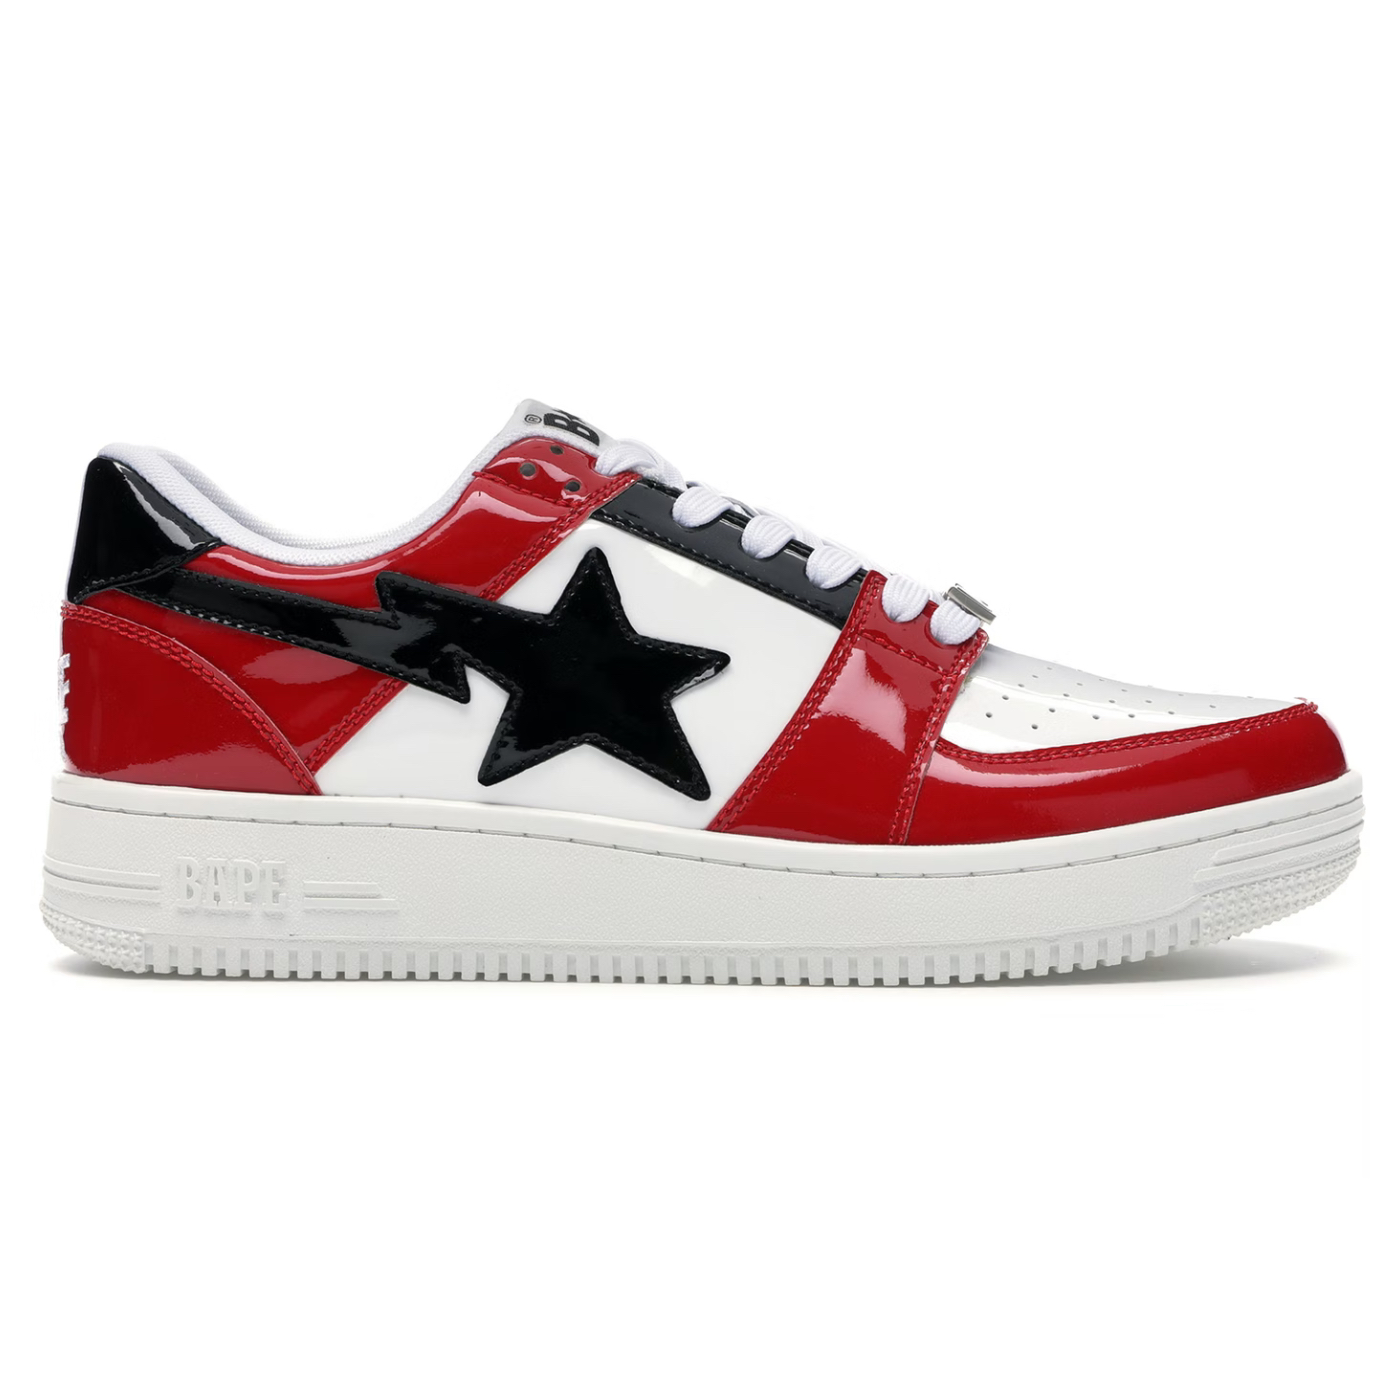 Lingakick Official Online Store » A Bathing Ape Bape Sta Low Red